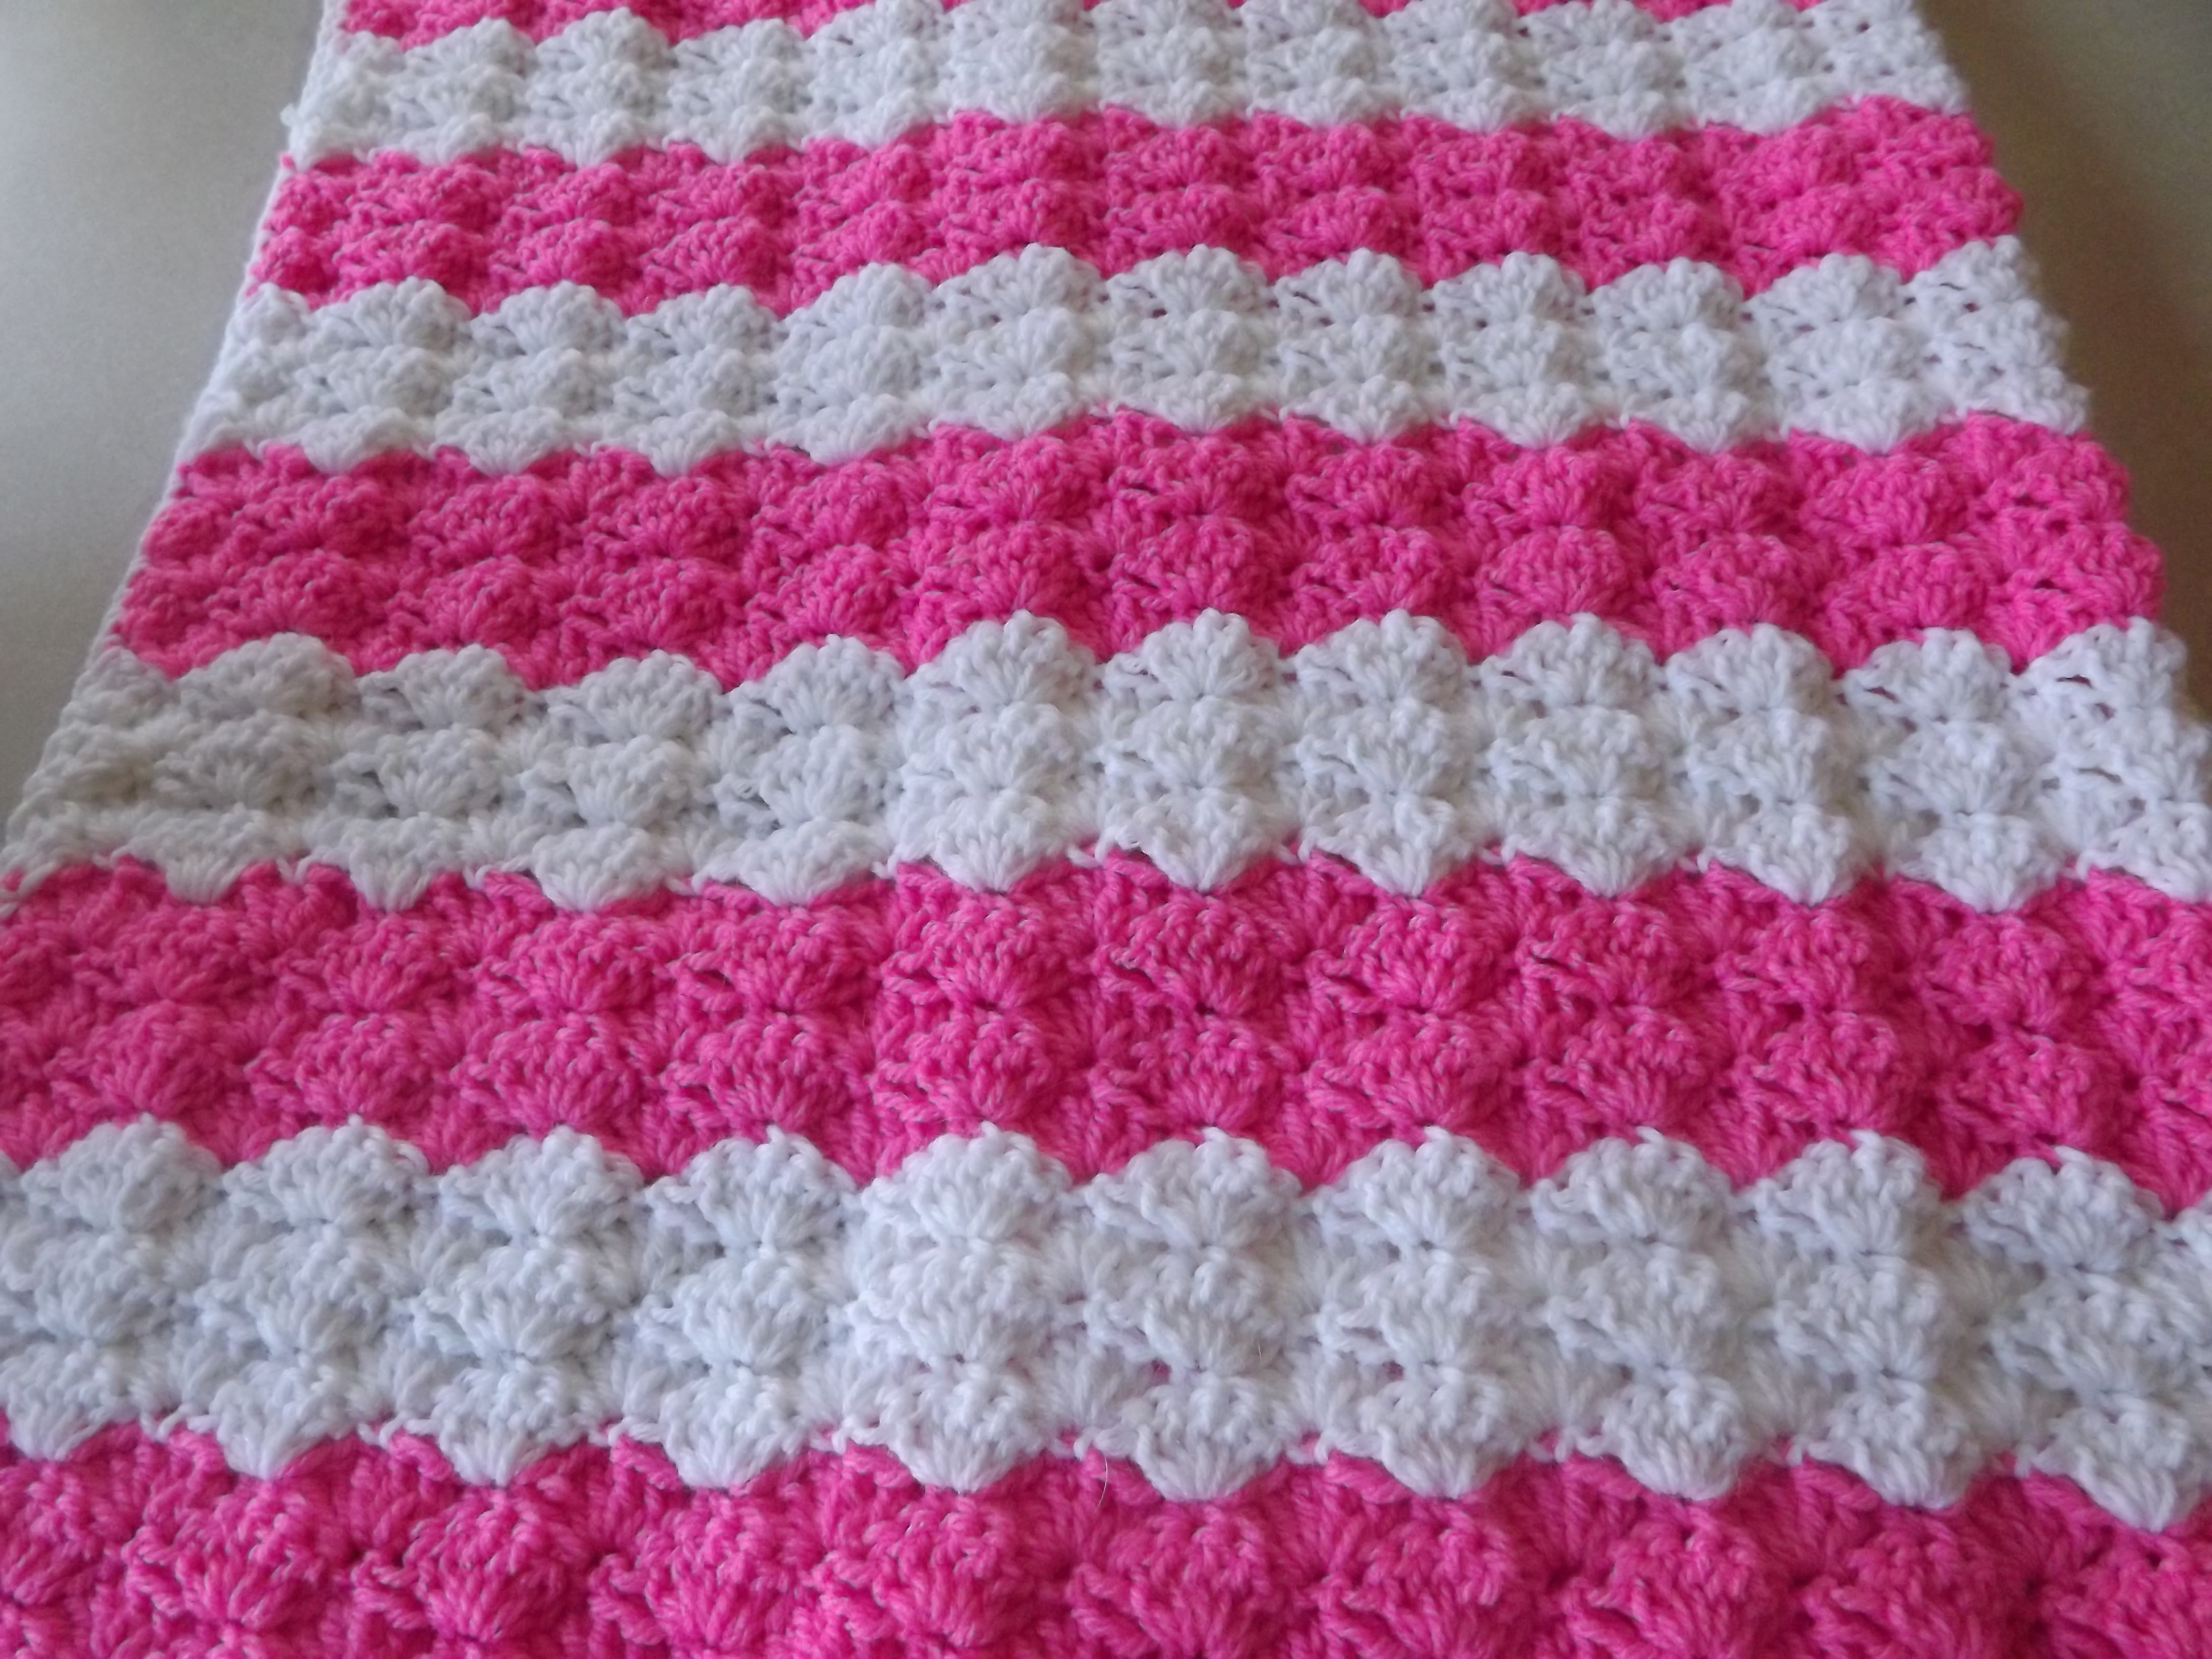 Knitting Patterns For Baby Blankets Free Free Crochet Patterns For Ba Blankets Pretty Shells Crochet And